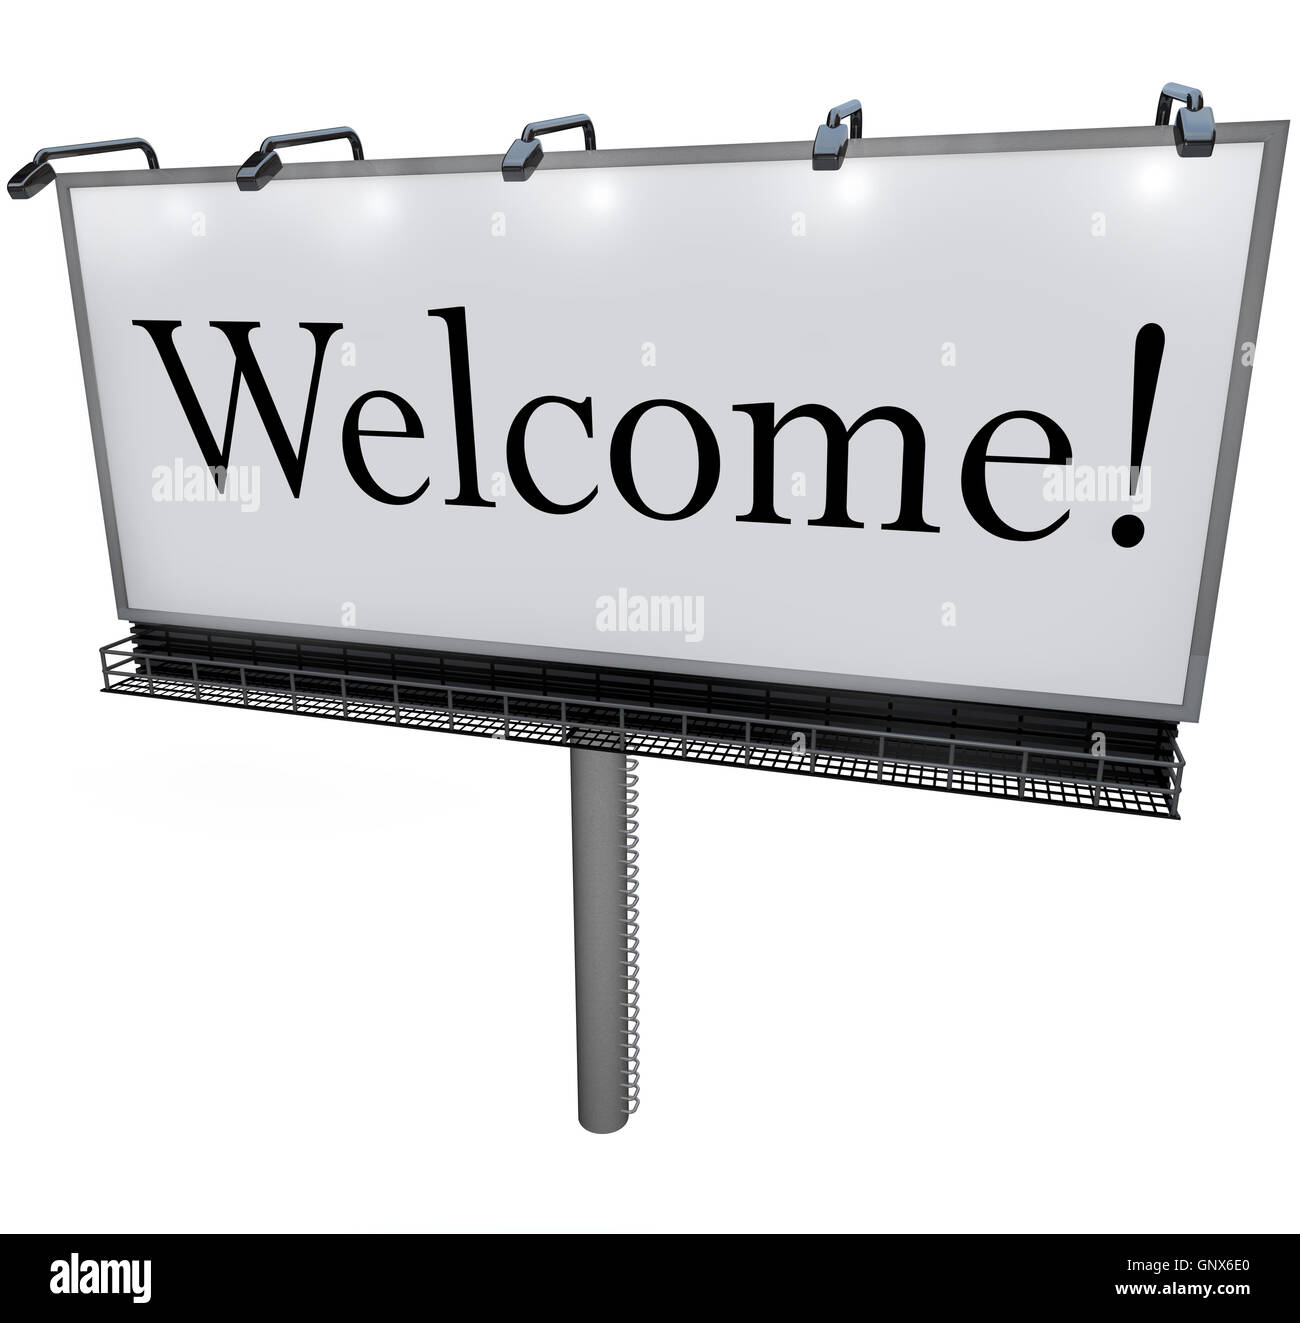 Welcome Word on Billboard Greeting to New Place Stock Photo